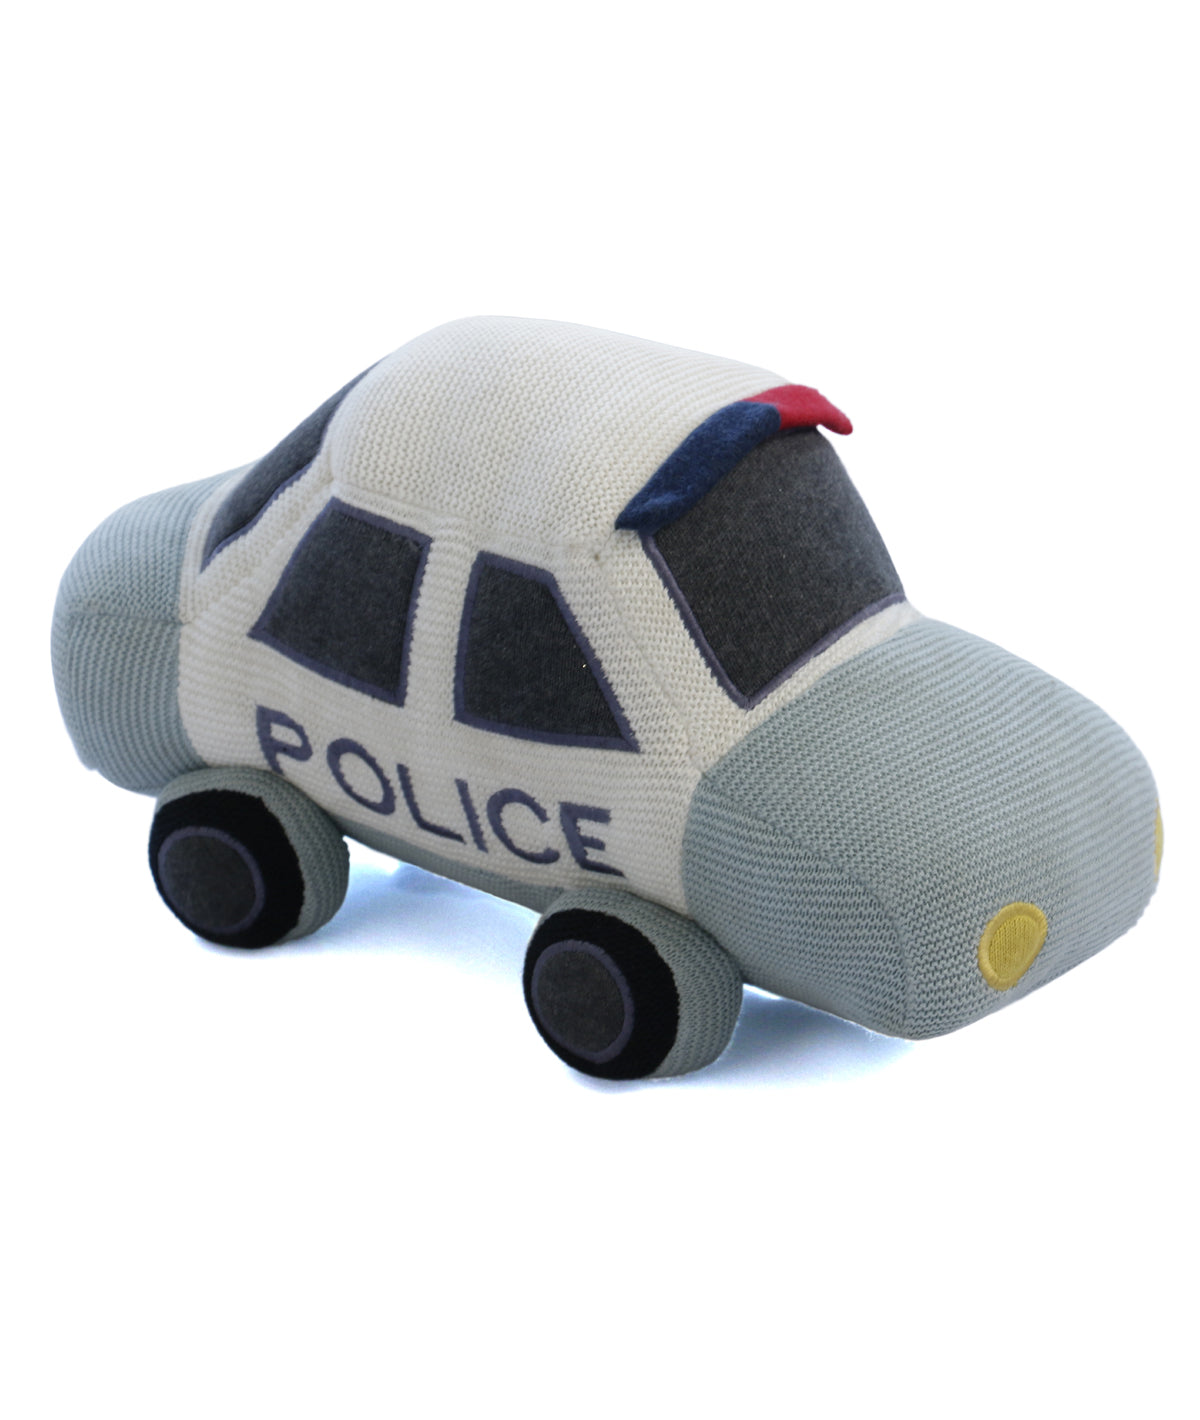 Police Car - Light Blue , Black and Natural 100% Cotton Knitted Stuffed Soft Toy for Babies / Kids